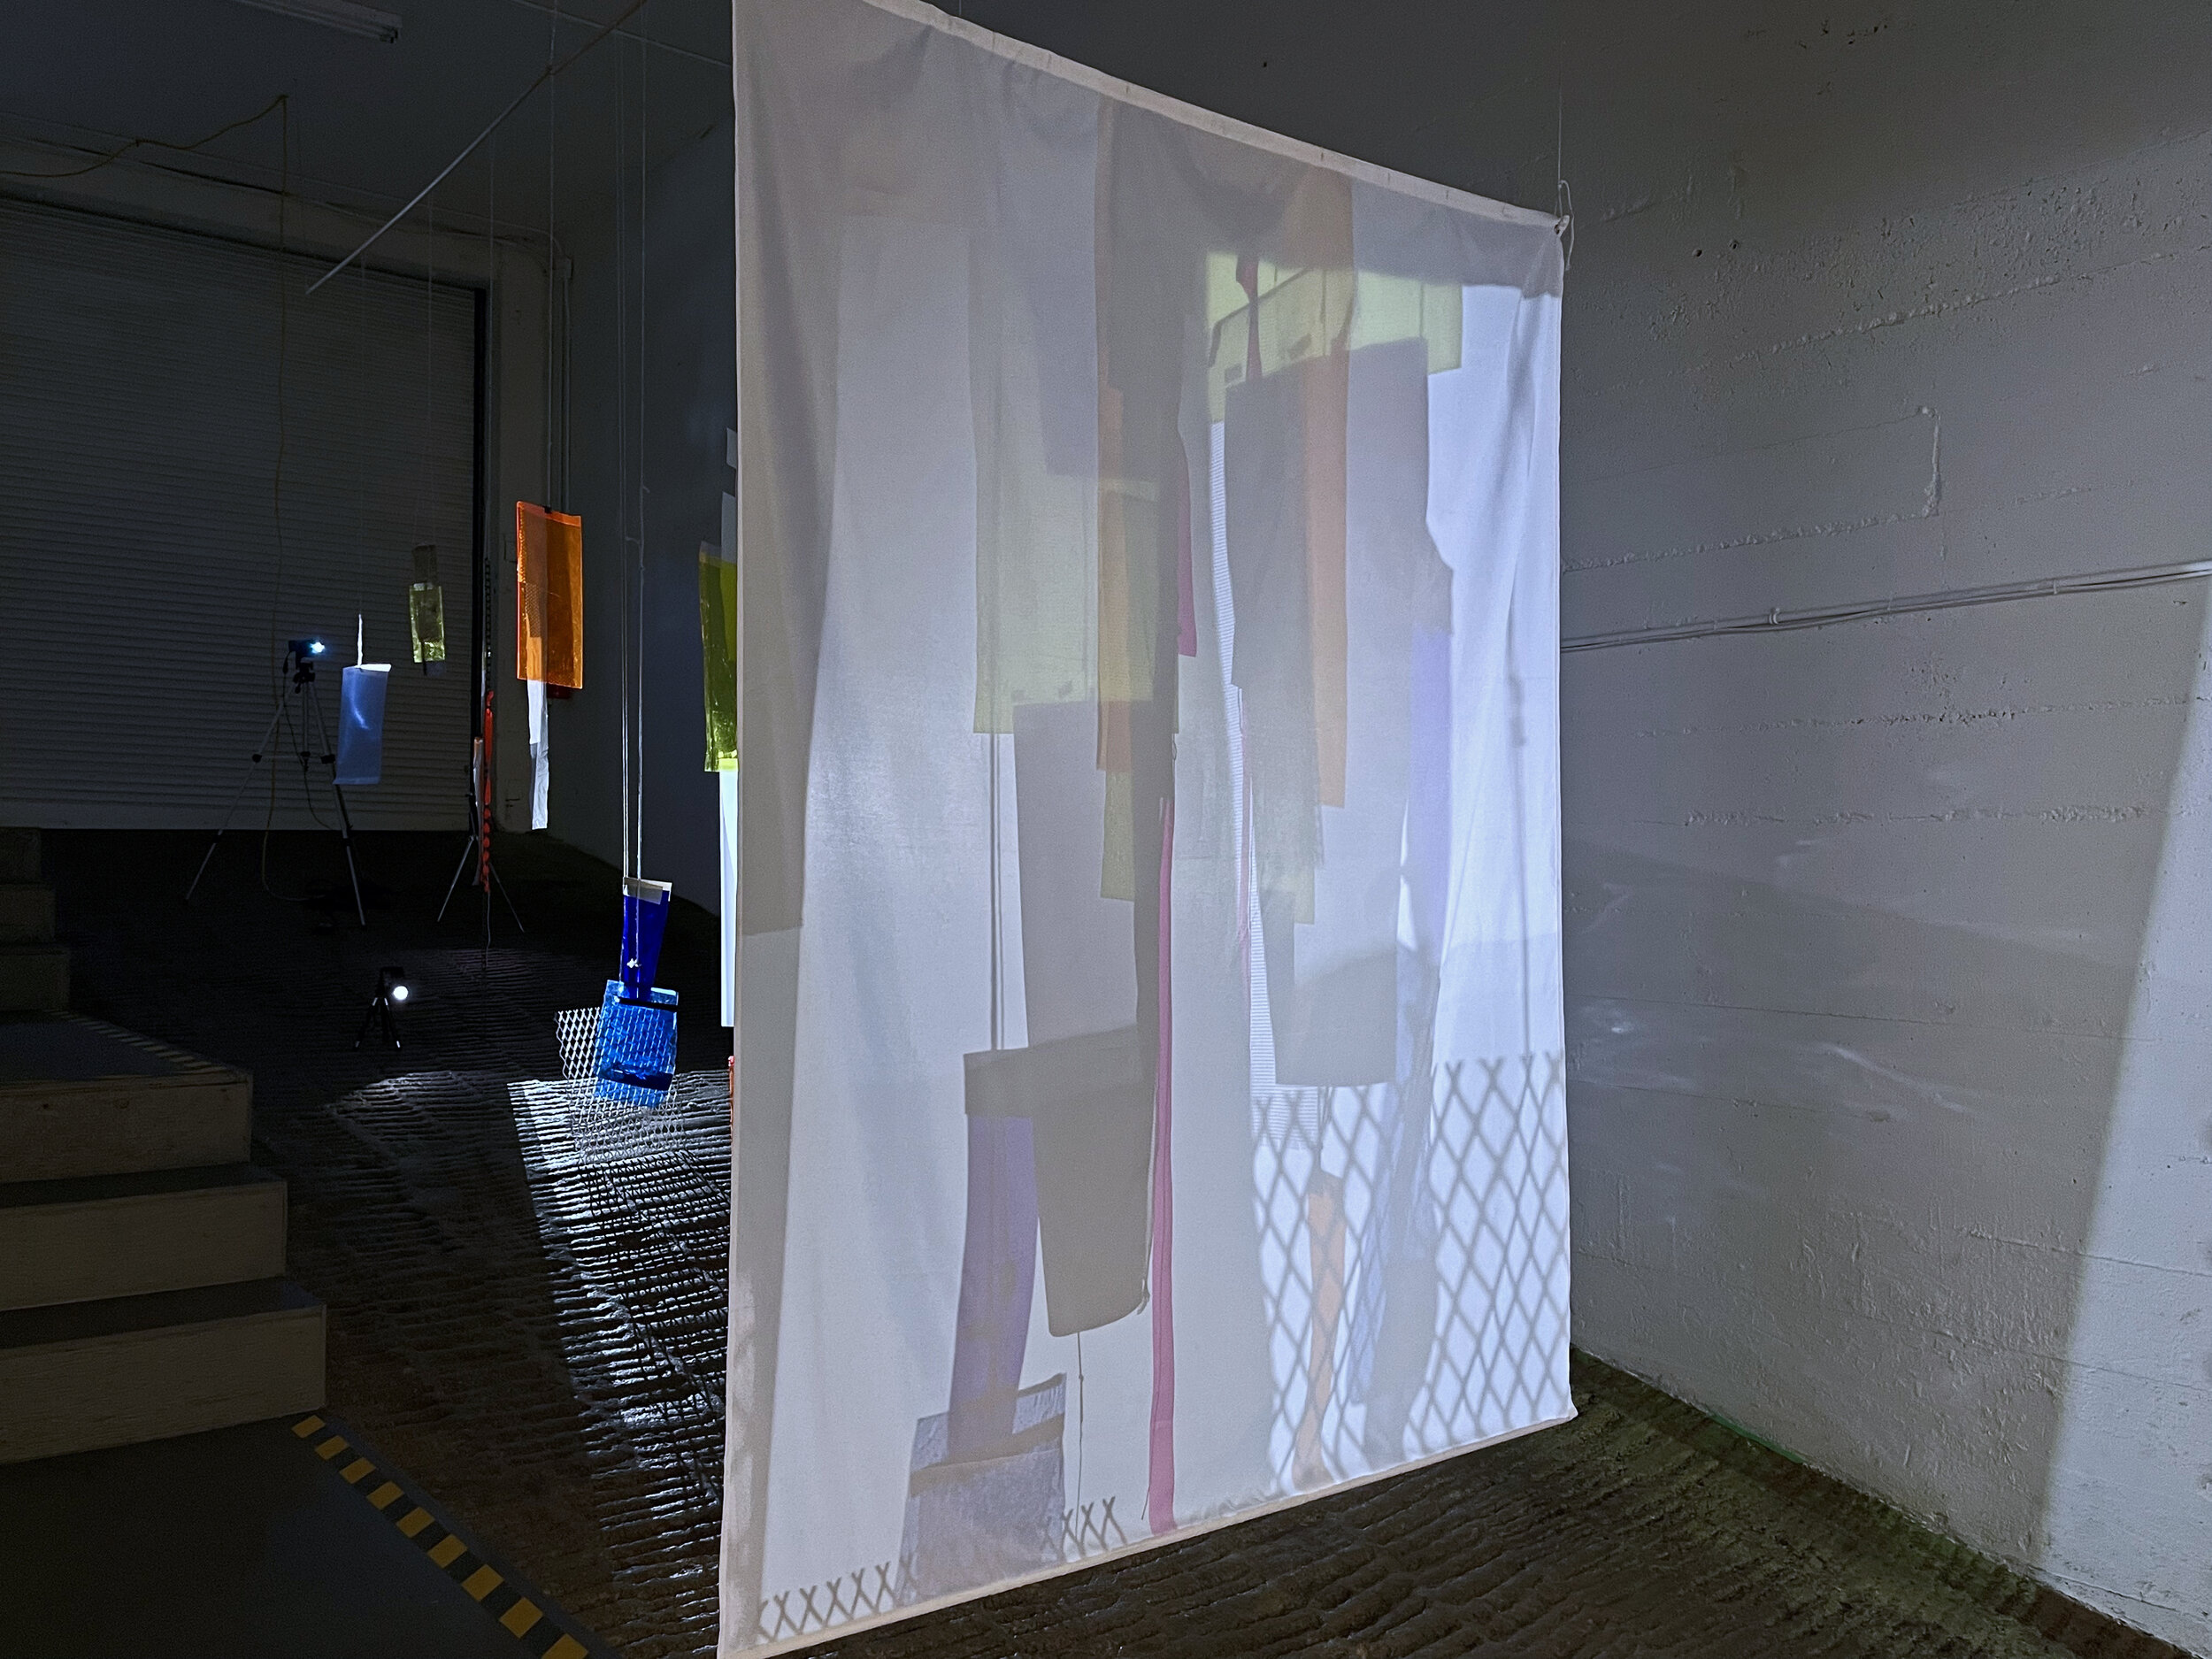   Arising,    acetate, cardboard, corrugated steel, rope, mesh, found objects, various tapes, shower curtain, dowels, chain and digital projectors on tripods (x3)  2021 